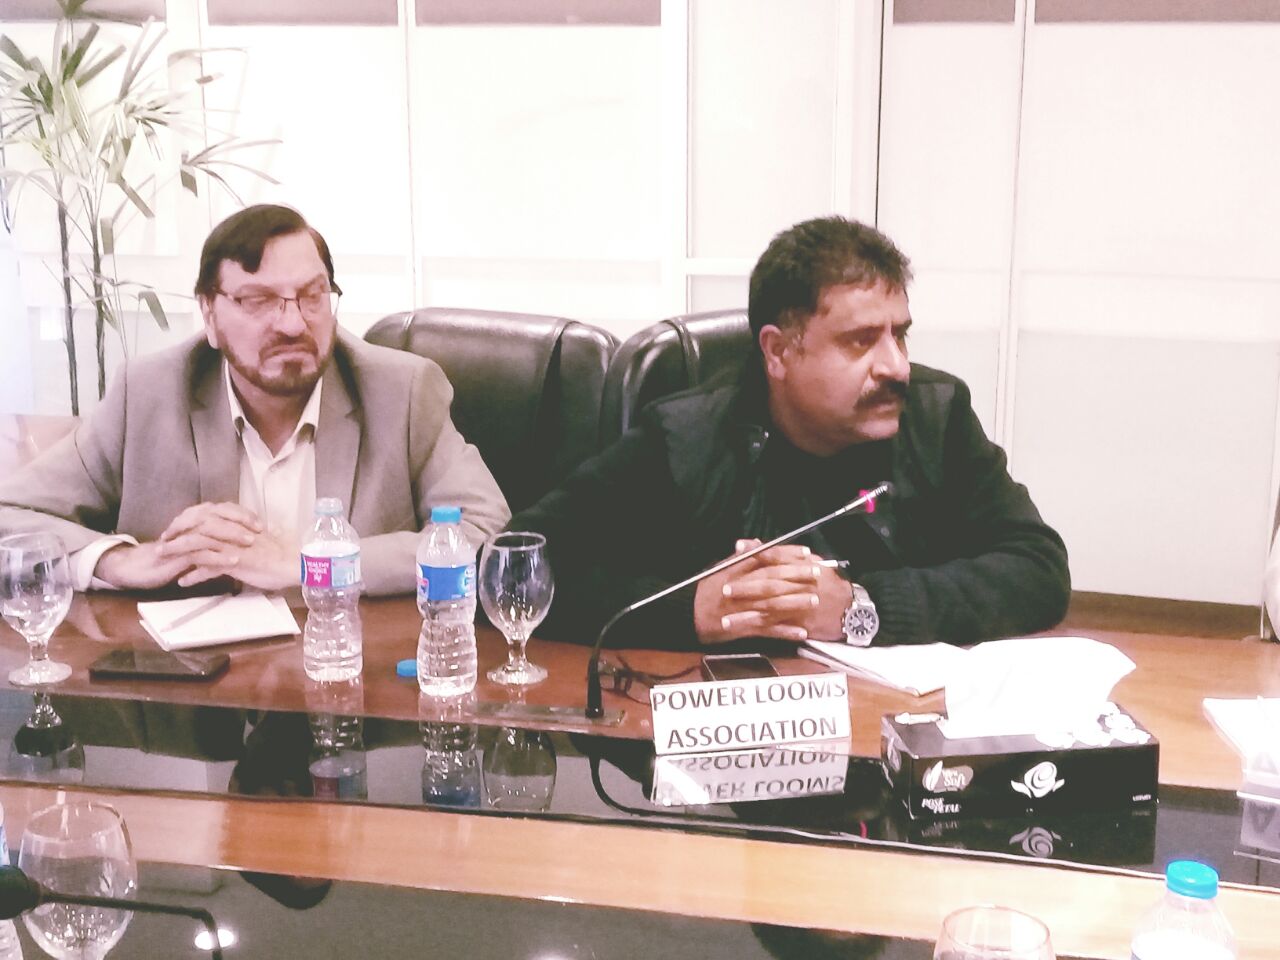 https://aptma.org.pk/wp-content/uploads/2021/10/Joint-Meeting-of-the-Textile-Industry-Associations-48.jpg